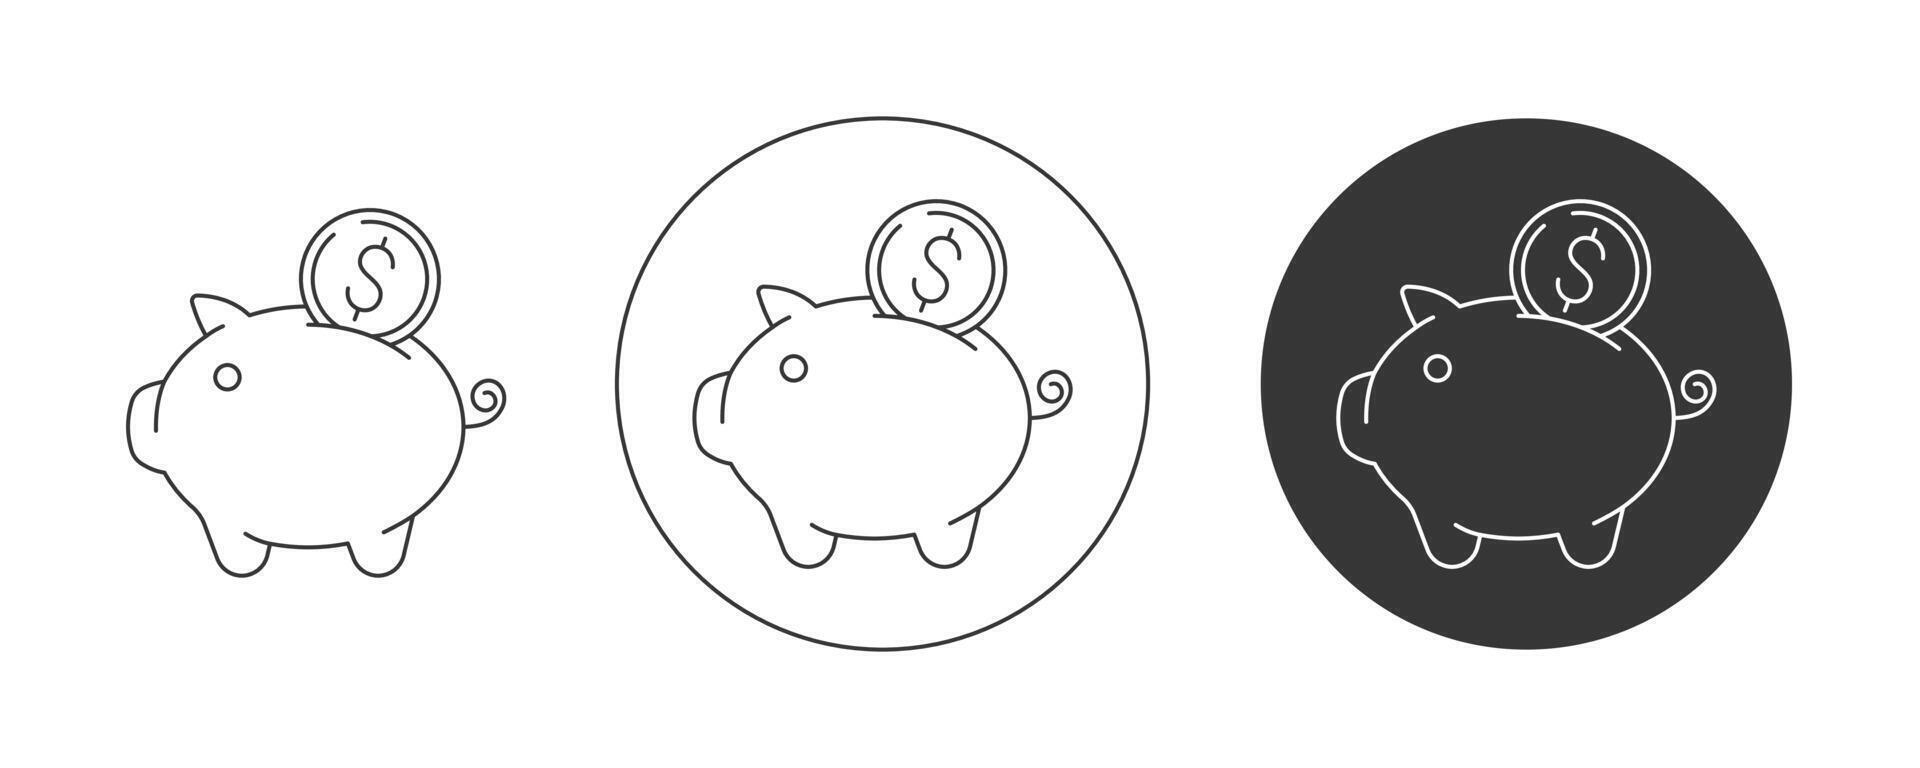 Piggy bank, coin with dollar sign. icon set, editable stroke. Flat line, pictogram. Finance and business concept. For app, website, ui. Isolated background. vector